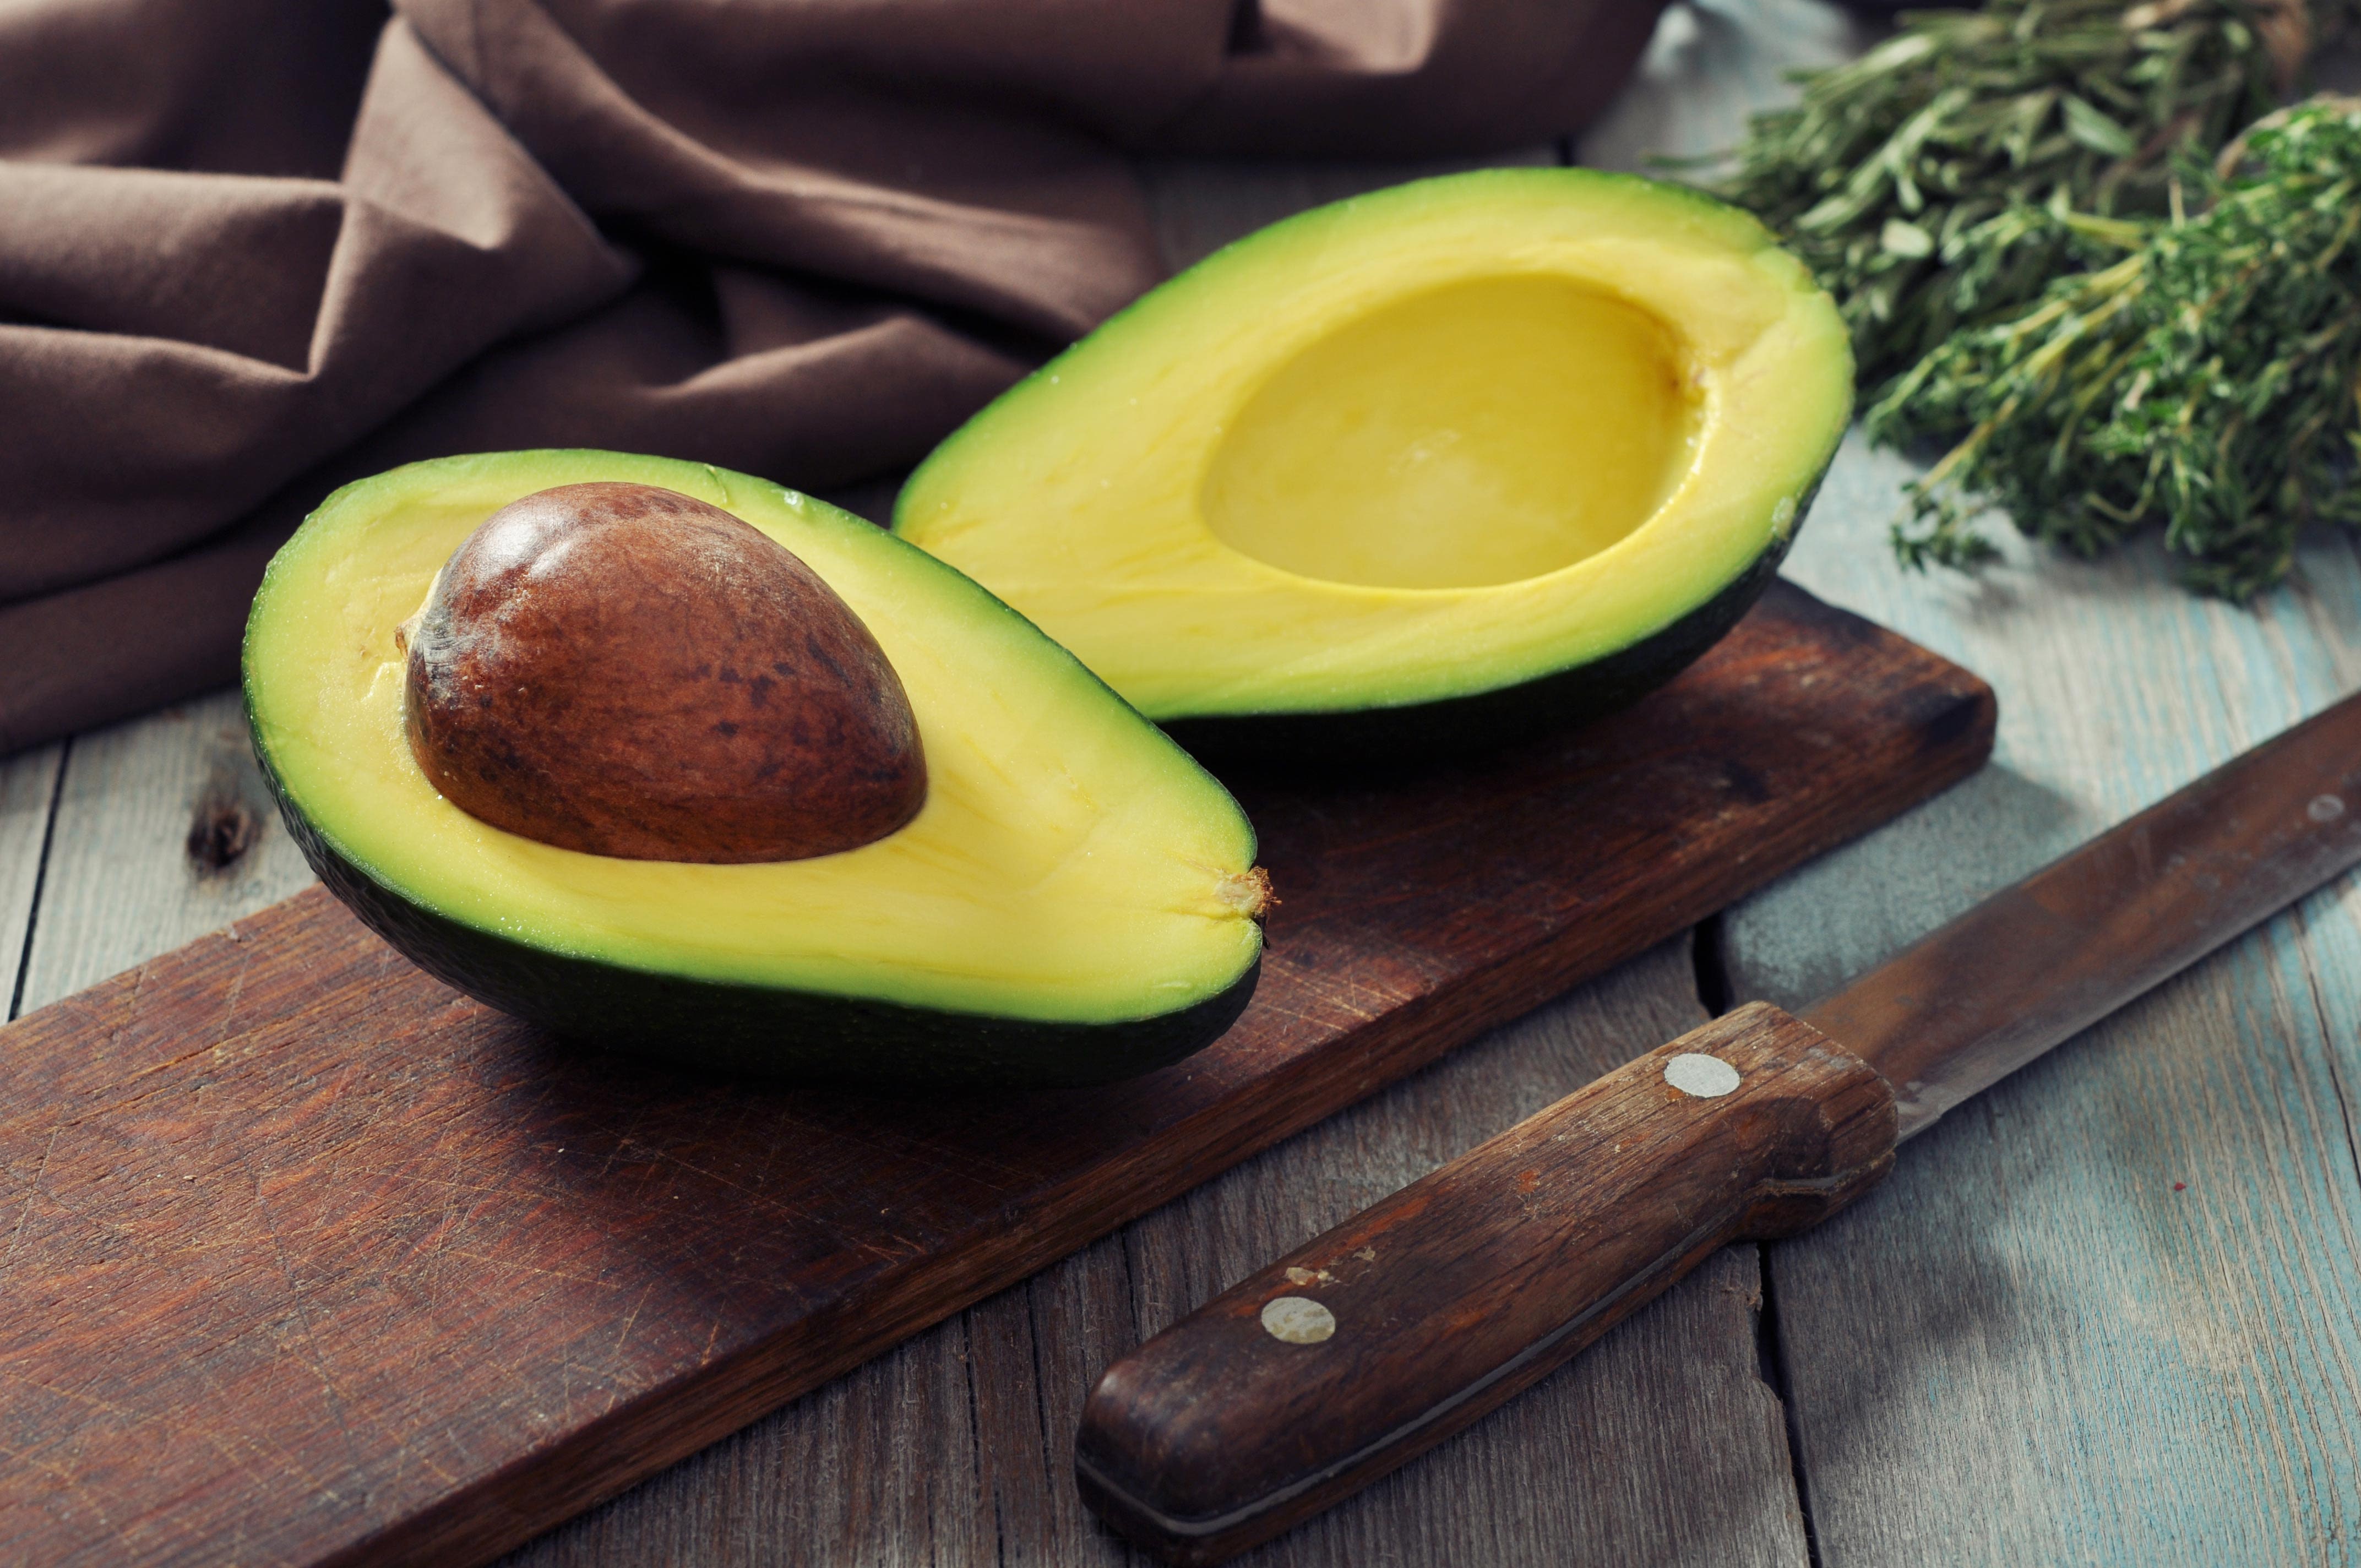 Benefits of avocados: 4 ways they are good for your health